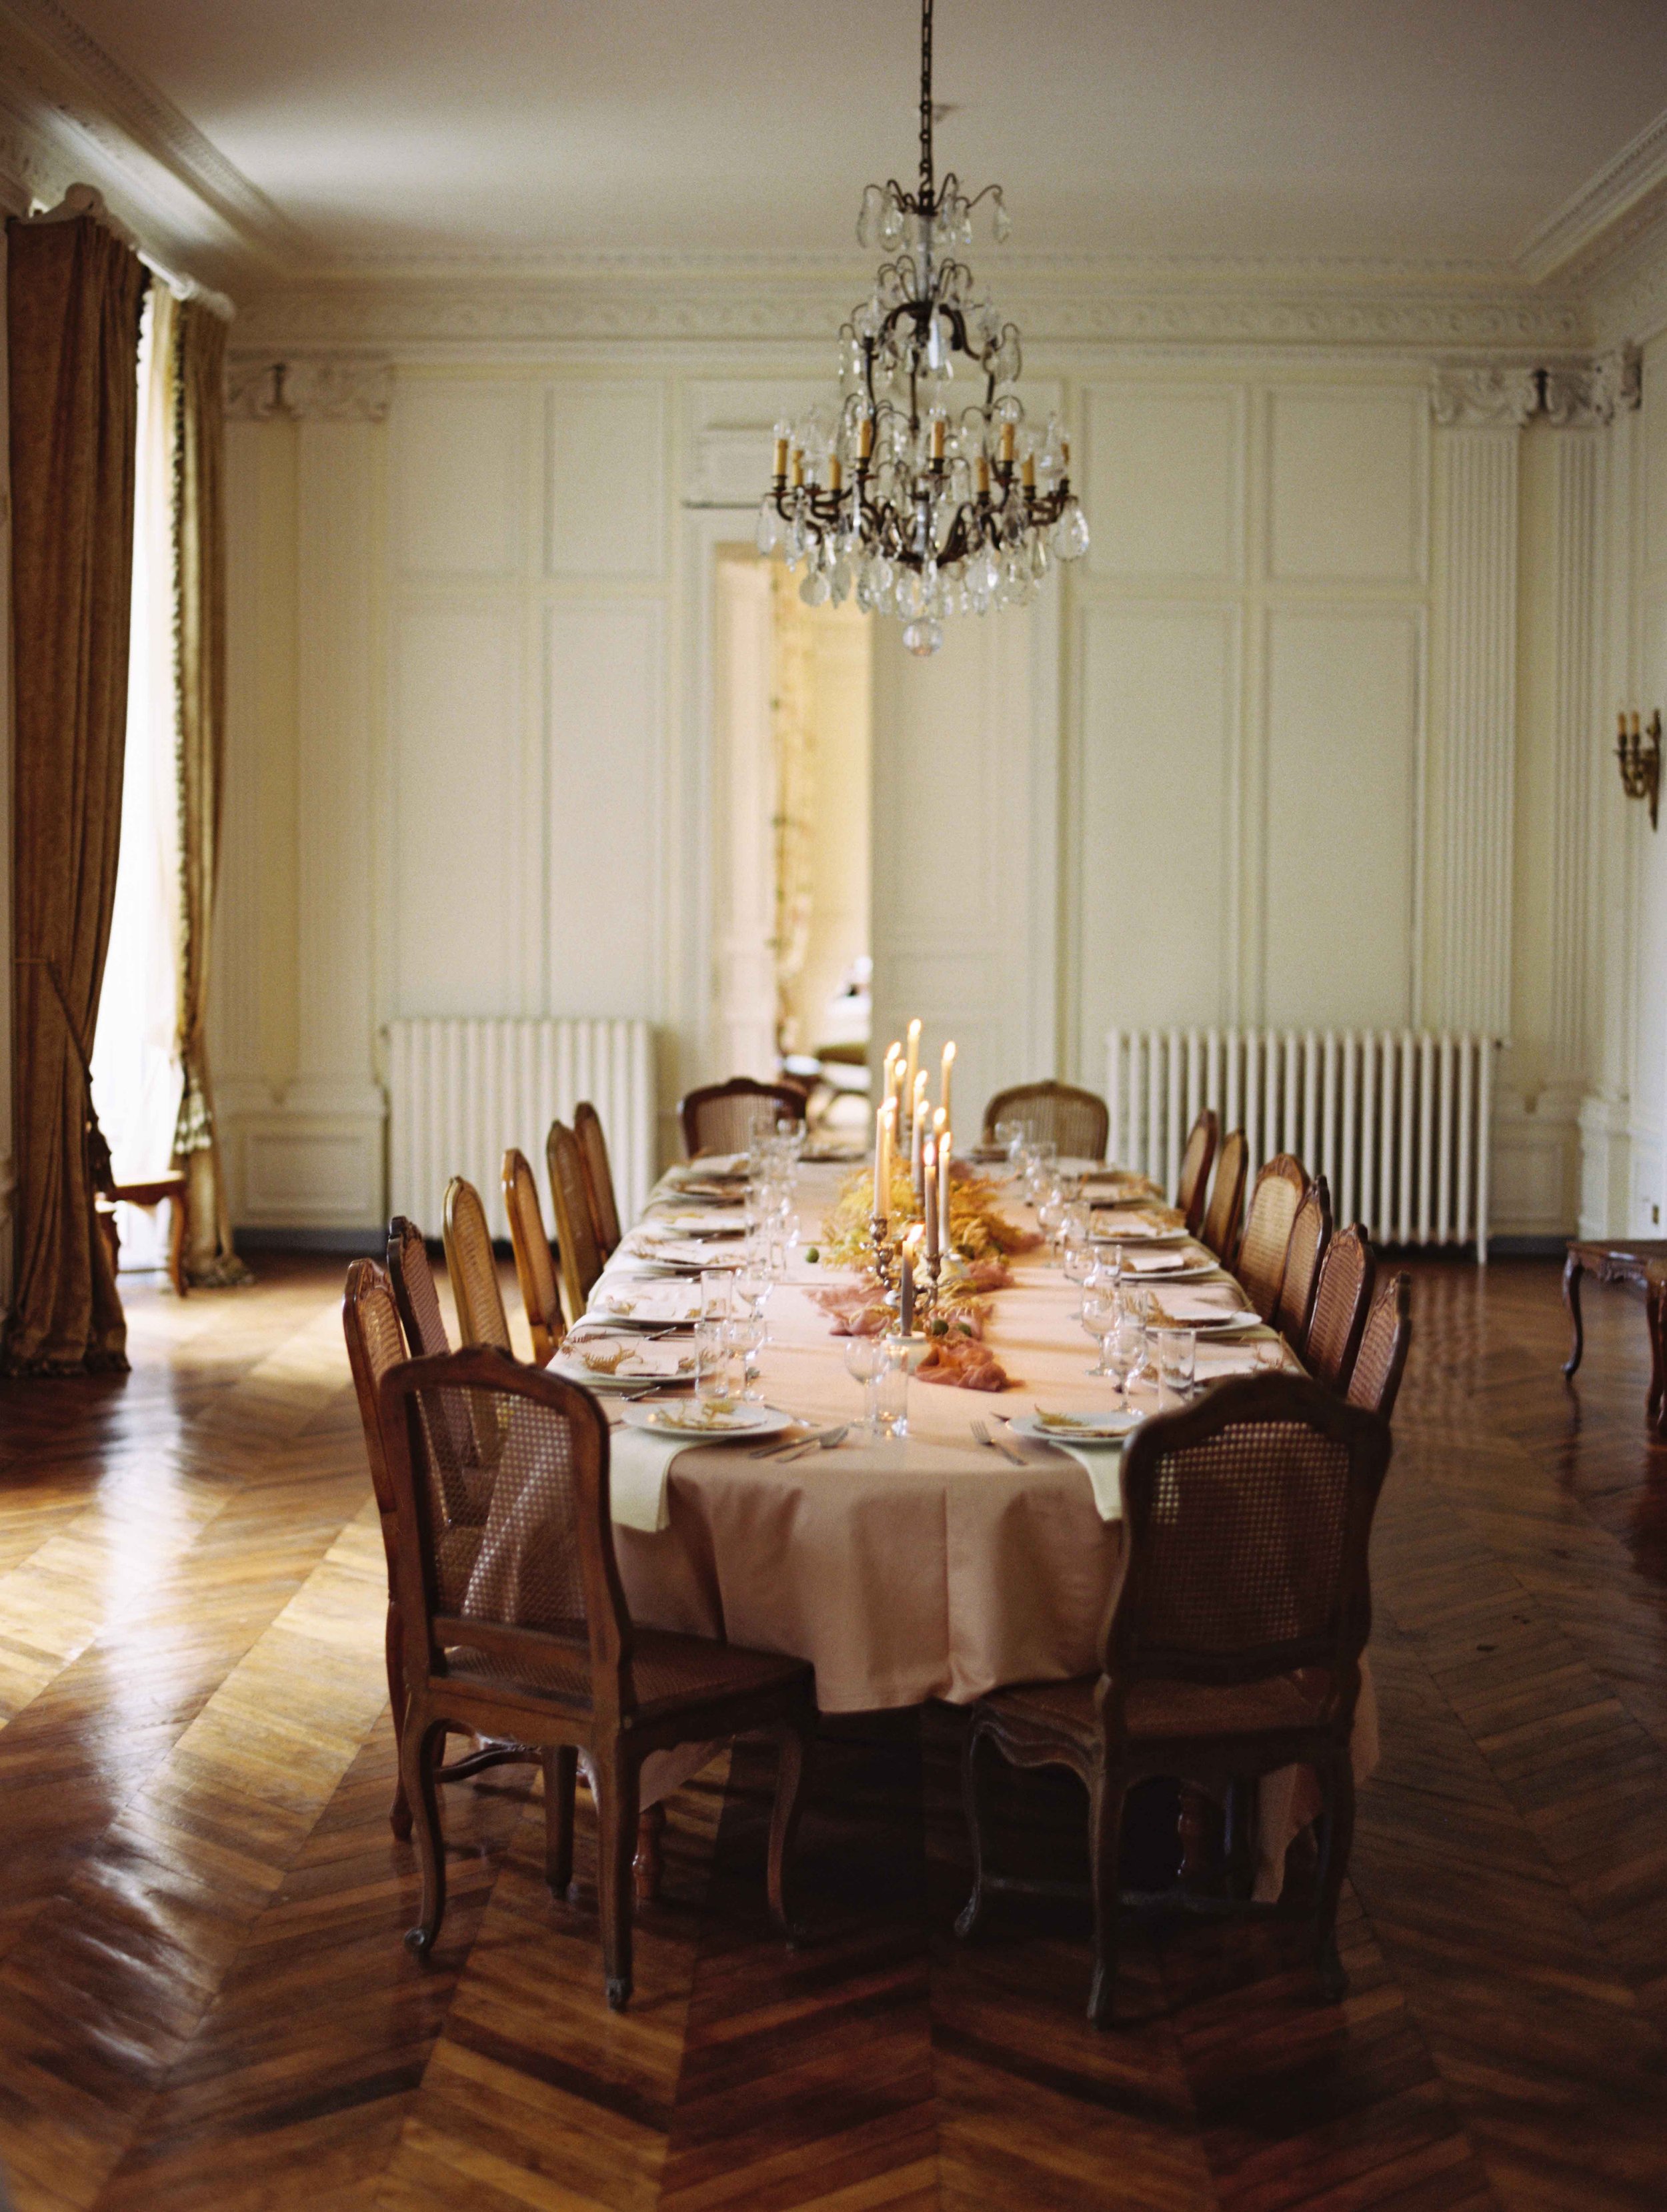 A elegant table setting available for formal and relaxed dining in the french chateau accommodation.